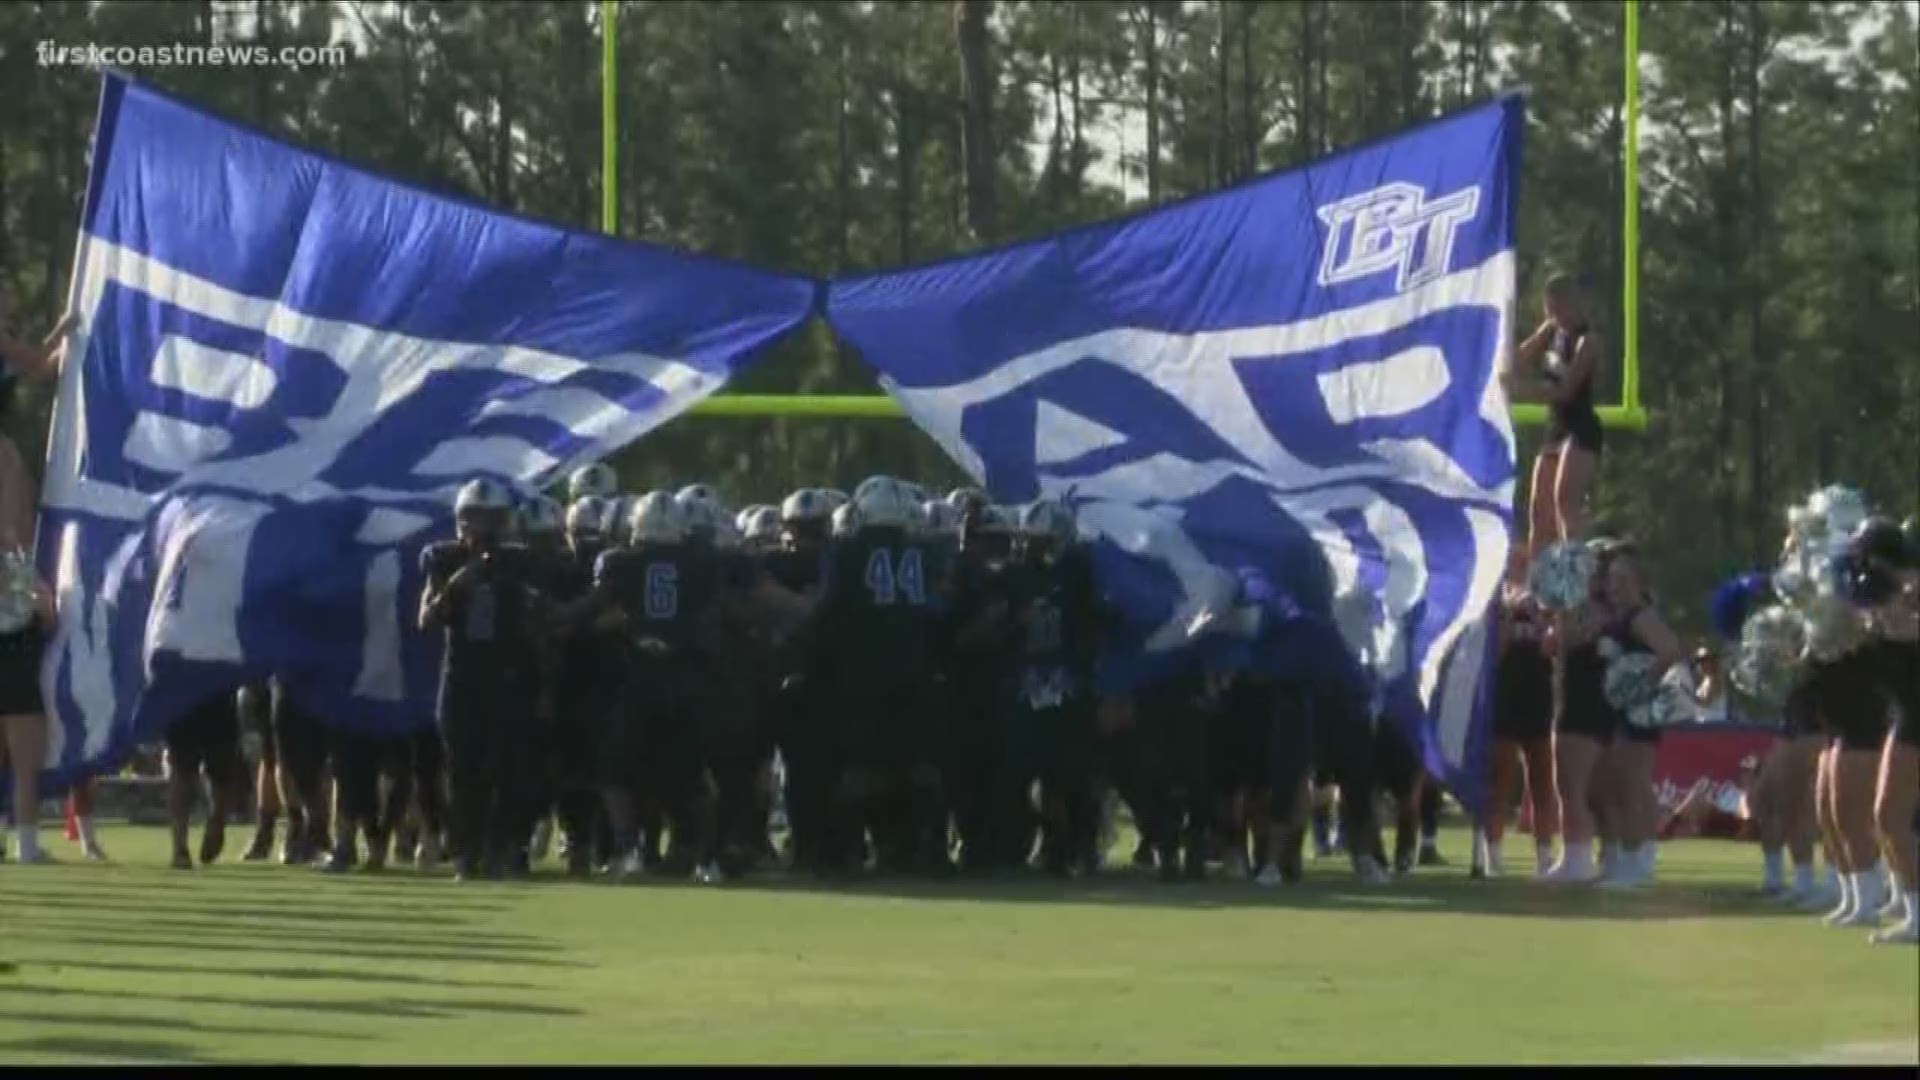 Bartram Trail defeated rival Creekside 28-14 to remain undefeated on the season -- and hand the Knights their first loss. This game was rescheduled due to Hurricane Dorian.